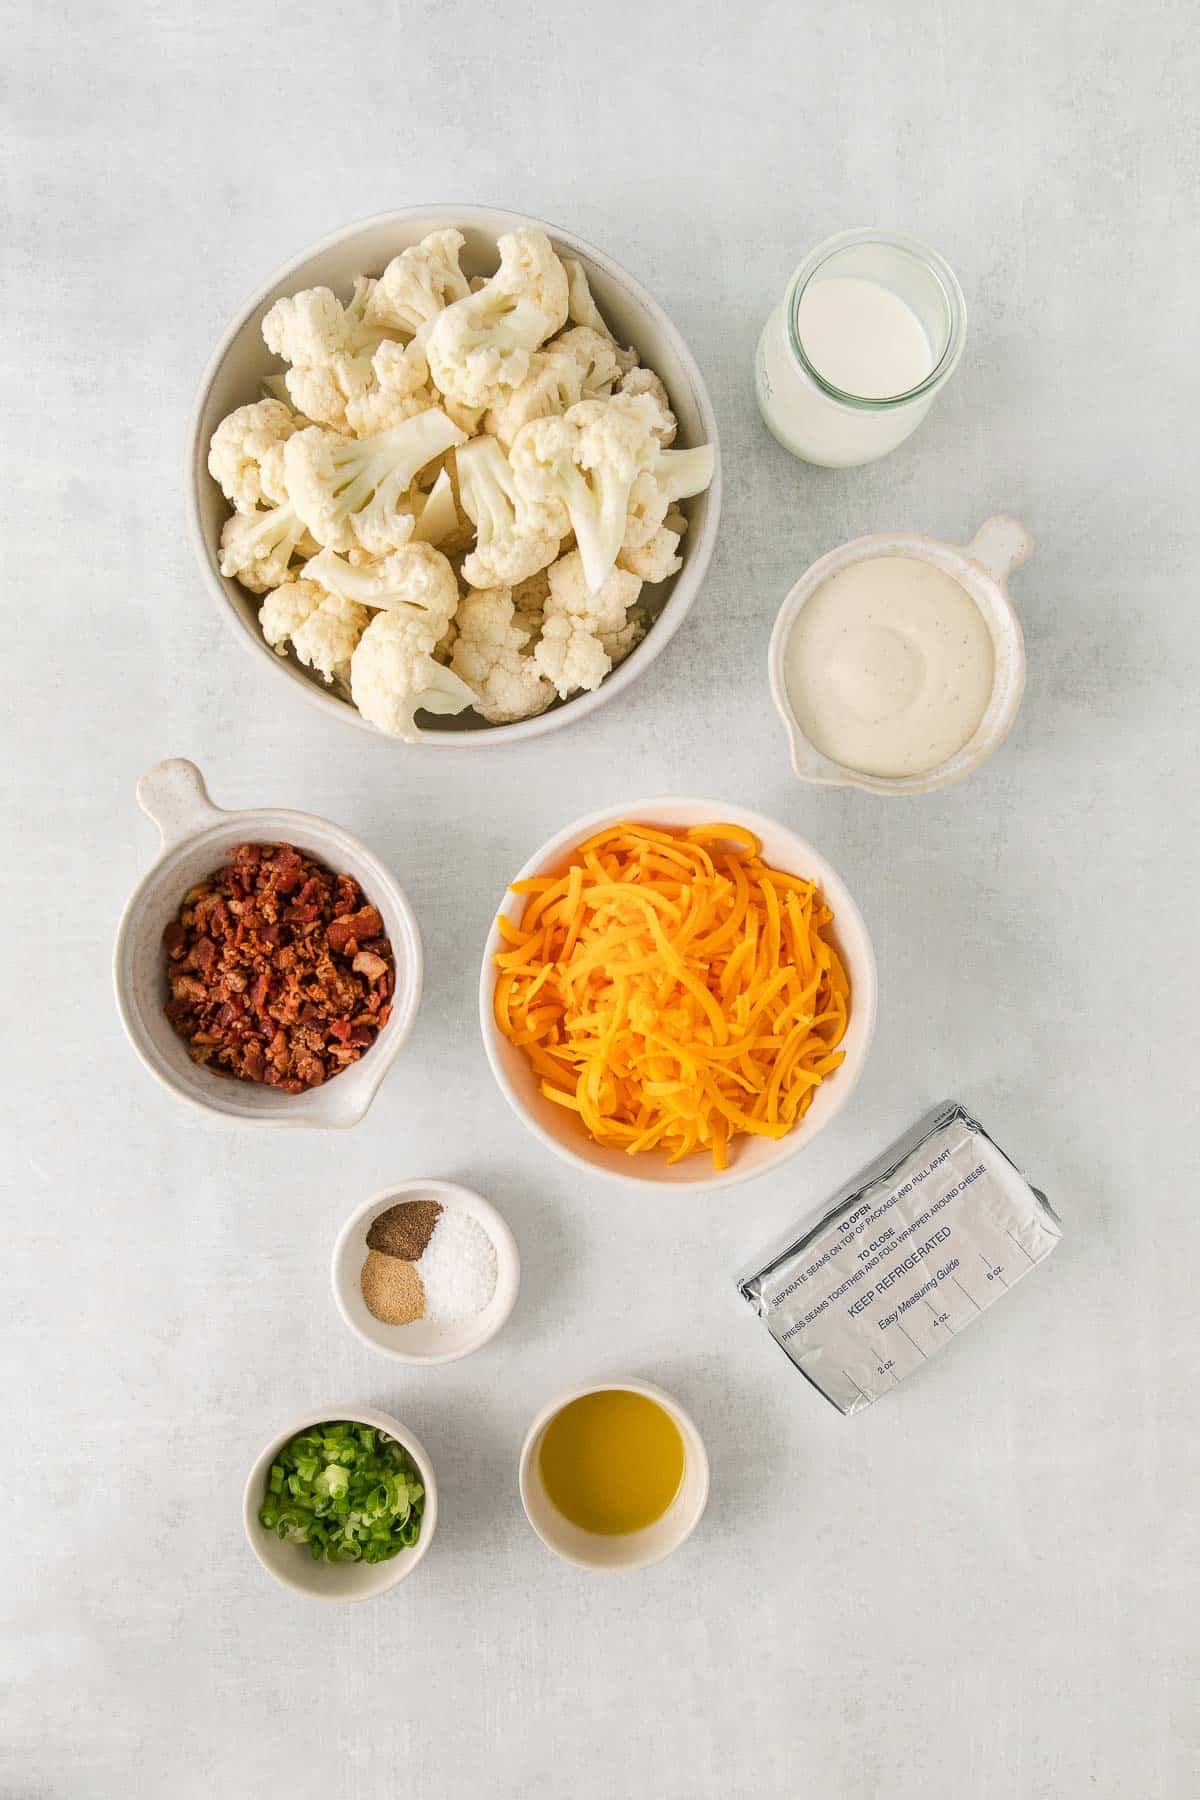 Several bowls with ingredients for Cheesy Cauliflower Casserole - Cauliflower, Cheese, Cream Cheese, Olive Oil, Seasoning Mix, Ranch, Milk, Bacon, Green Onion.